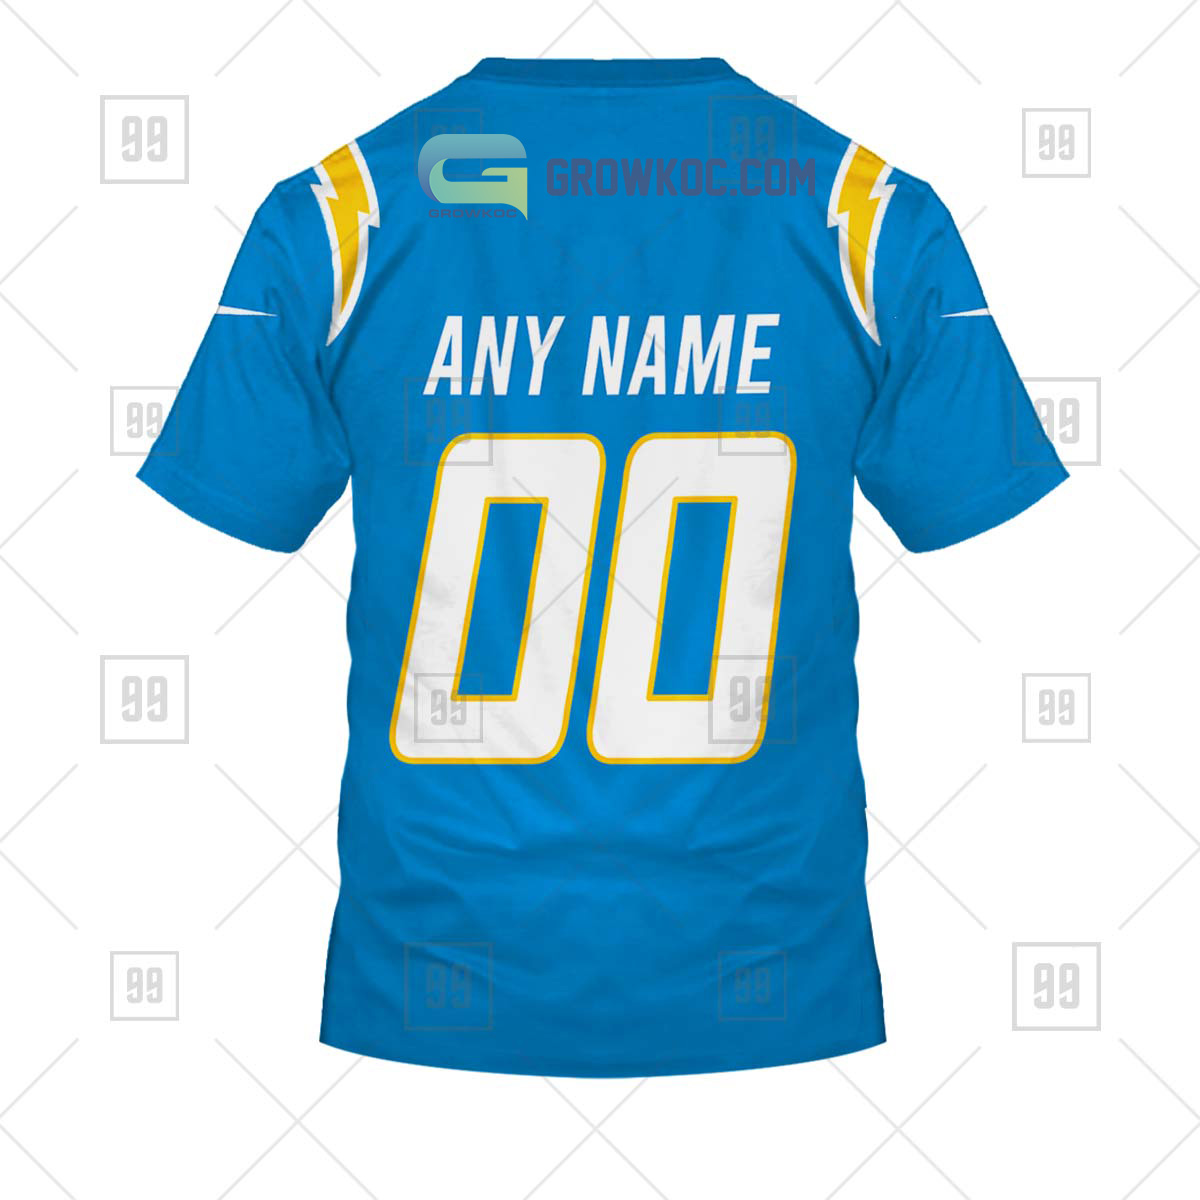 Los Angeles Chargers Jerseys, Chargers Kit, Los Angeles Chargers Uniforms